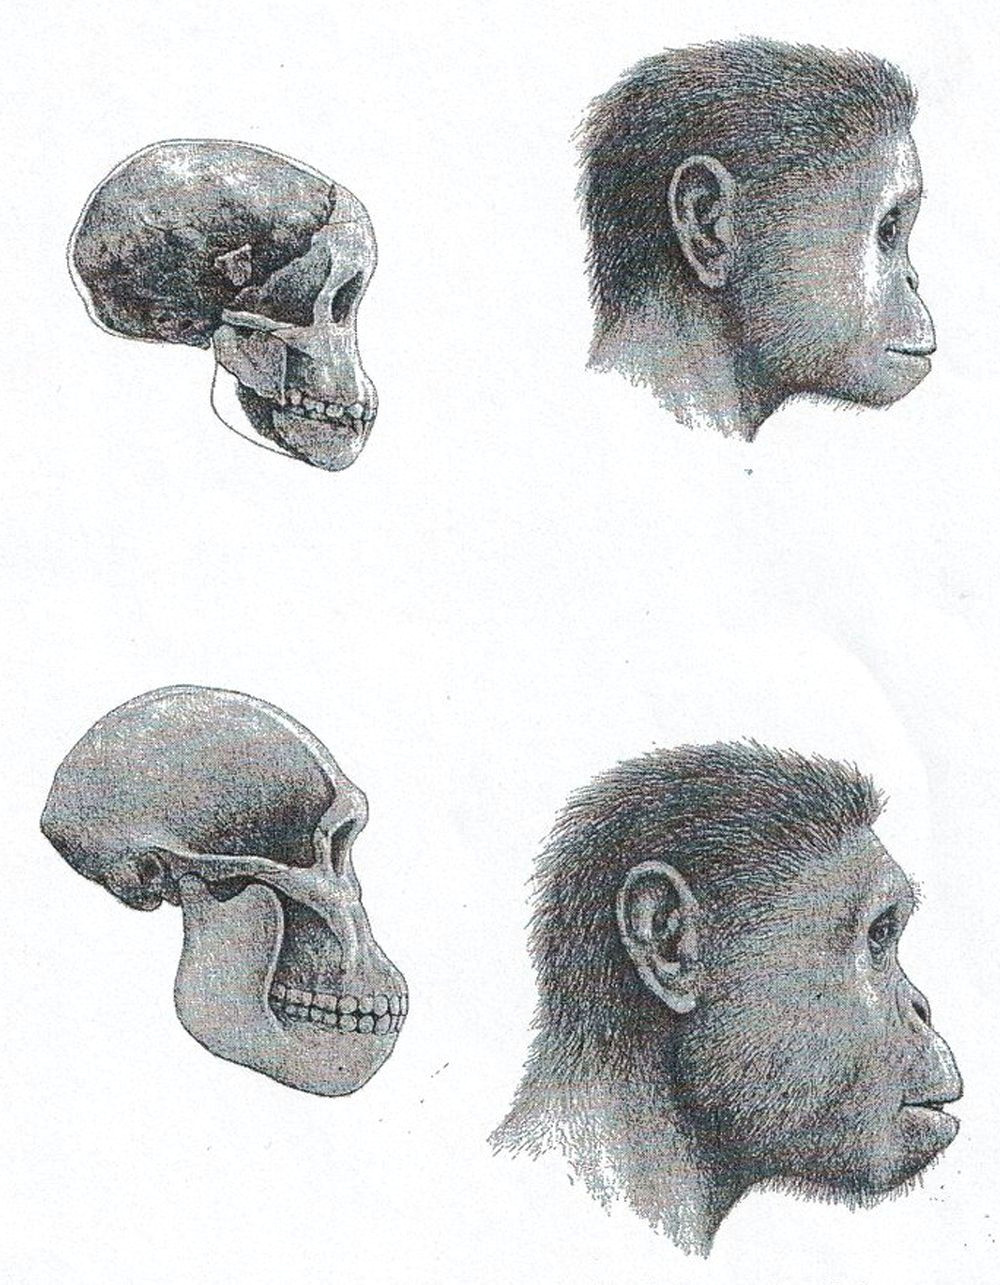 Evo 9 Drawing Australopithecus Africanus Comparison Taung Child top and Sts